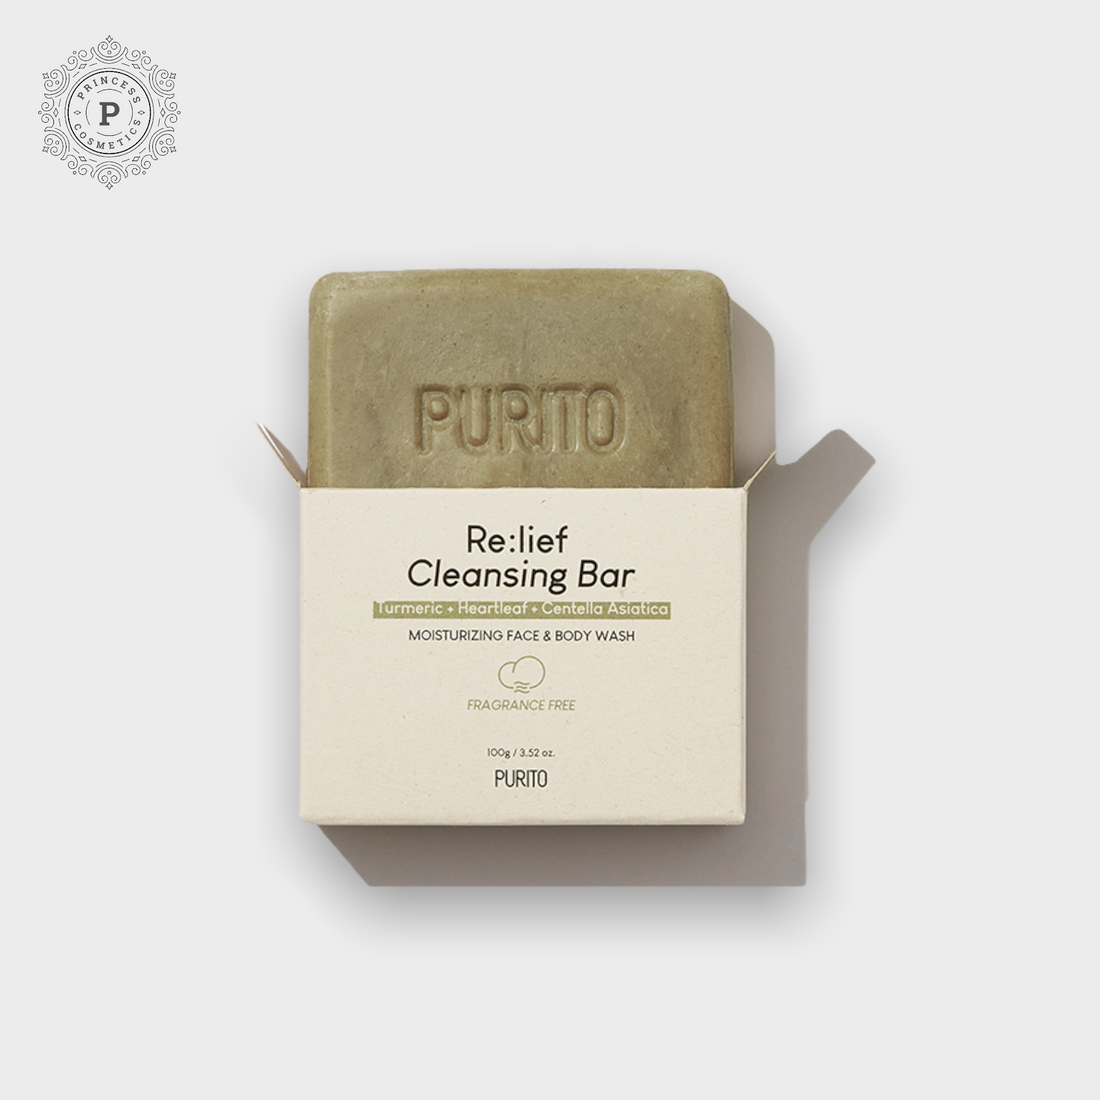 Purito Re:lief Cleansing Bar 100g